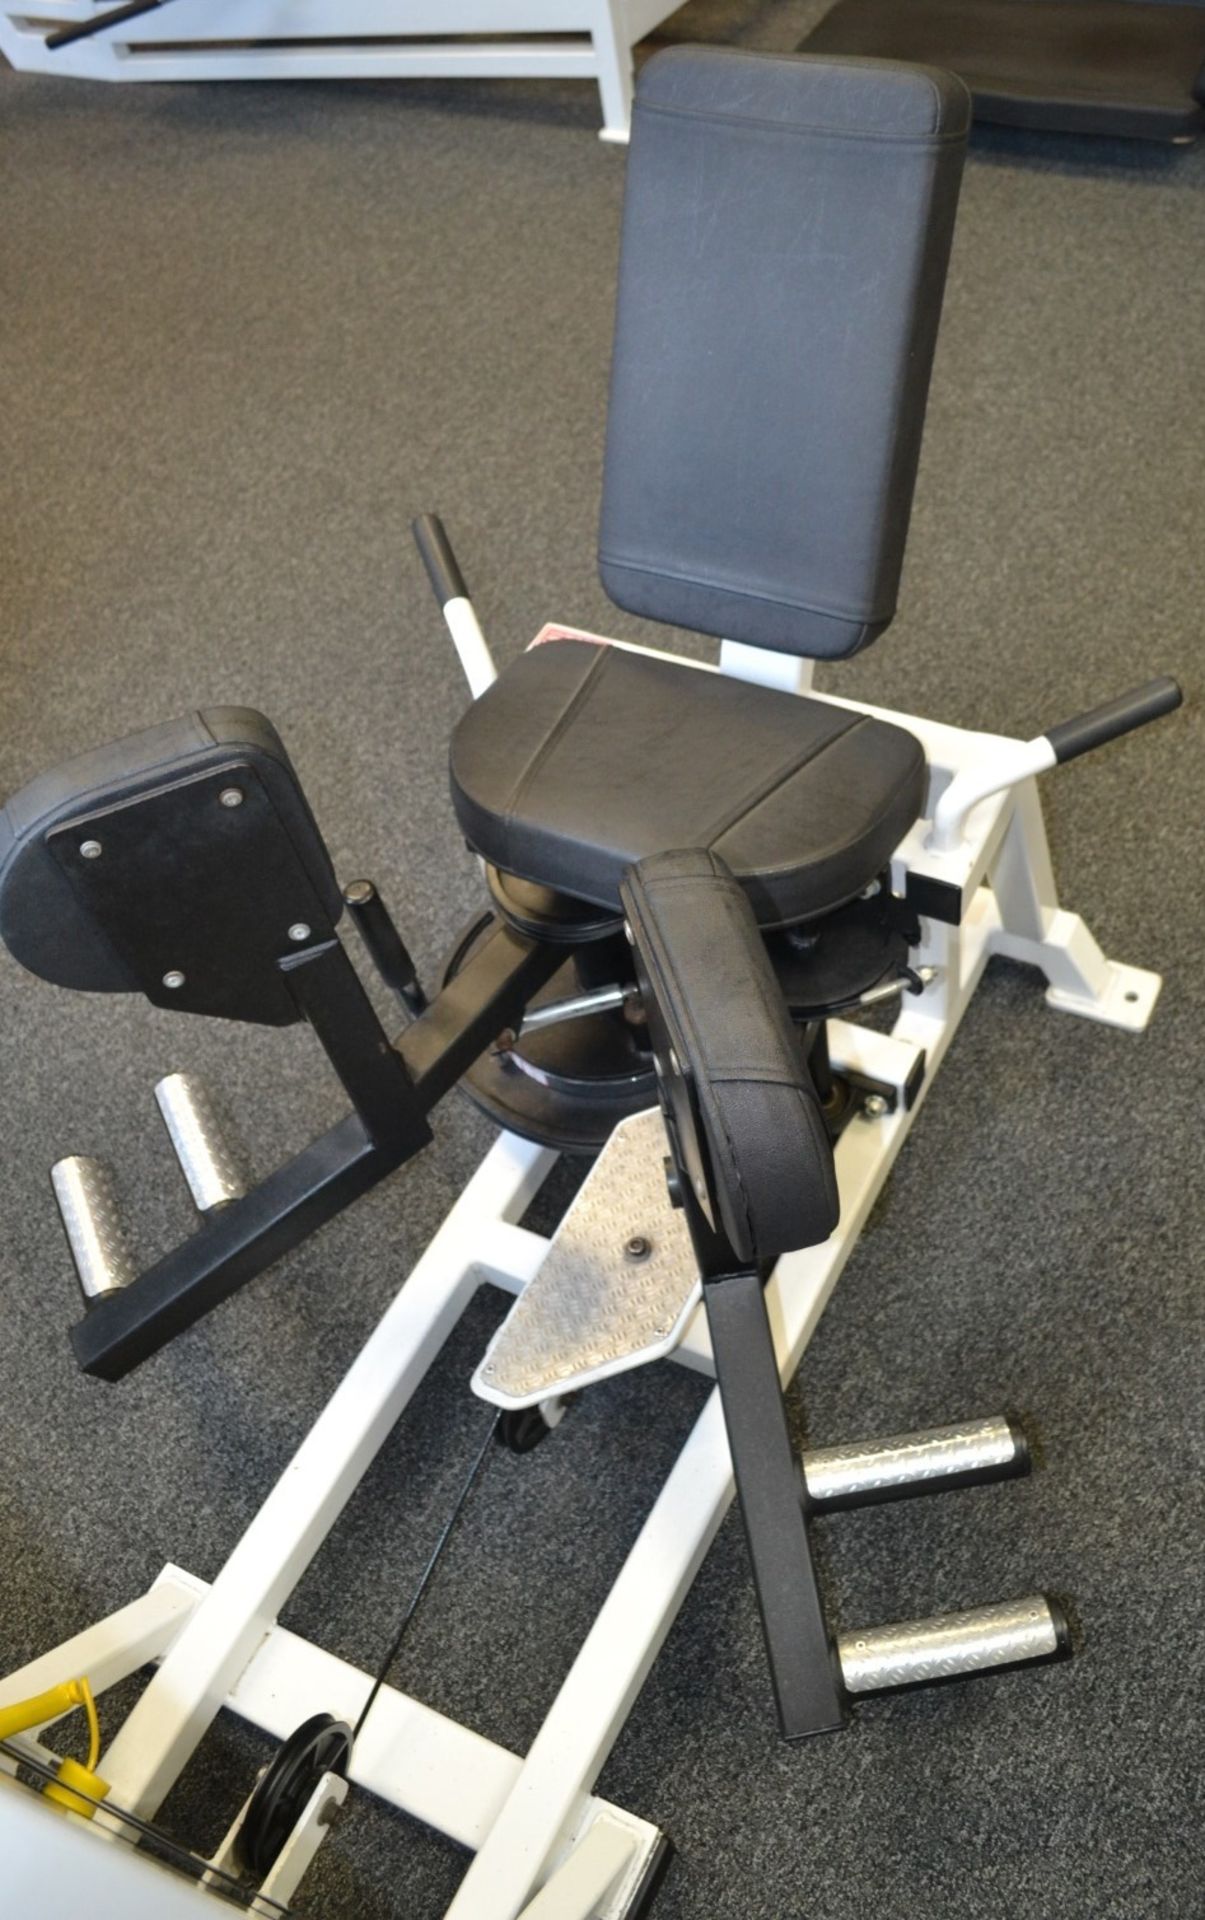 1 x Force Inner Thigh Abductor Pin Loaded Gym Machine With 75kg Weights - Image 4 of 4